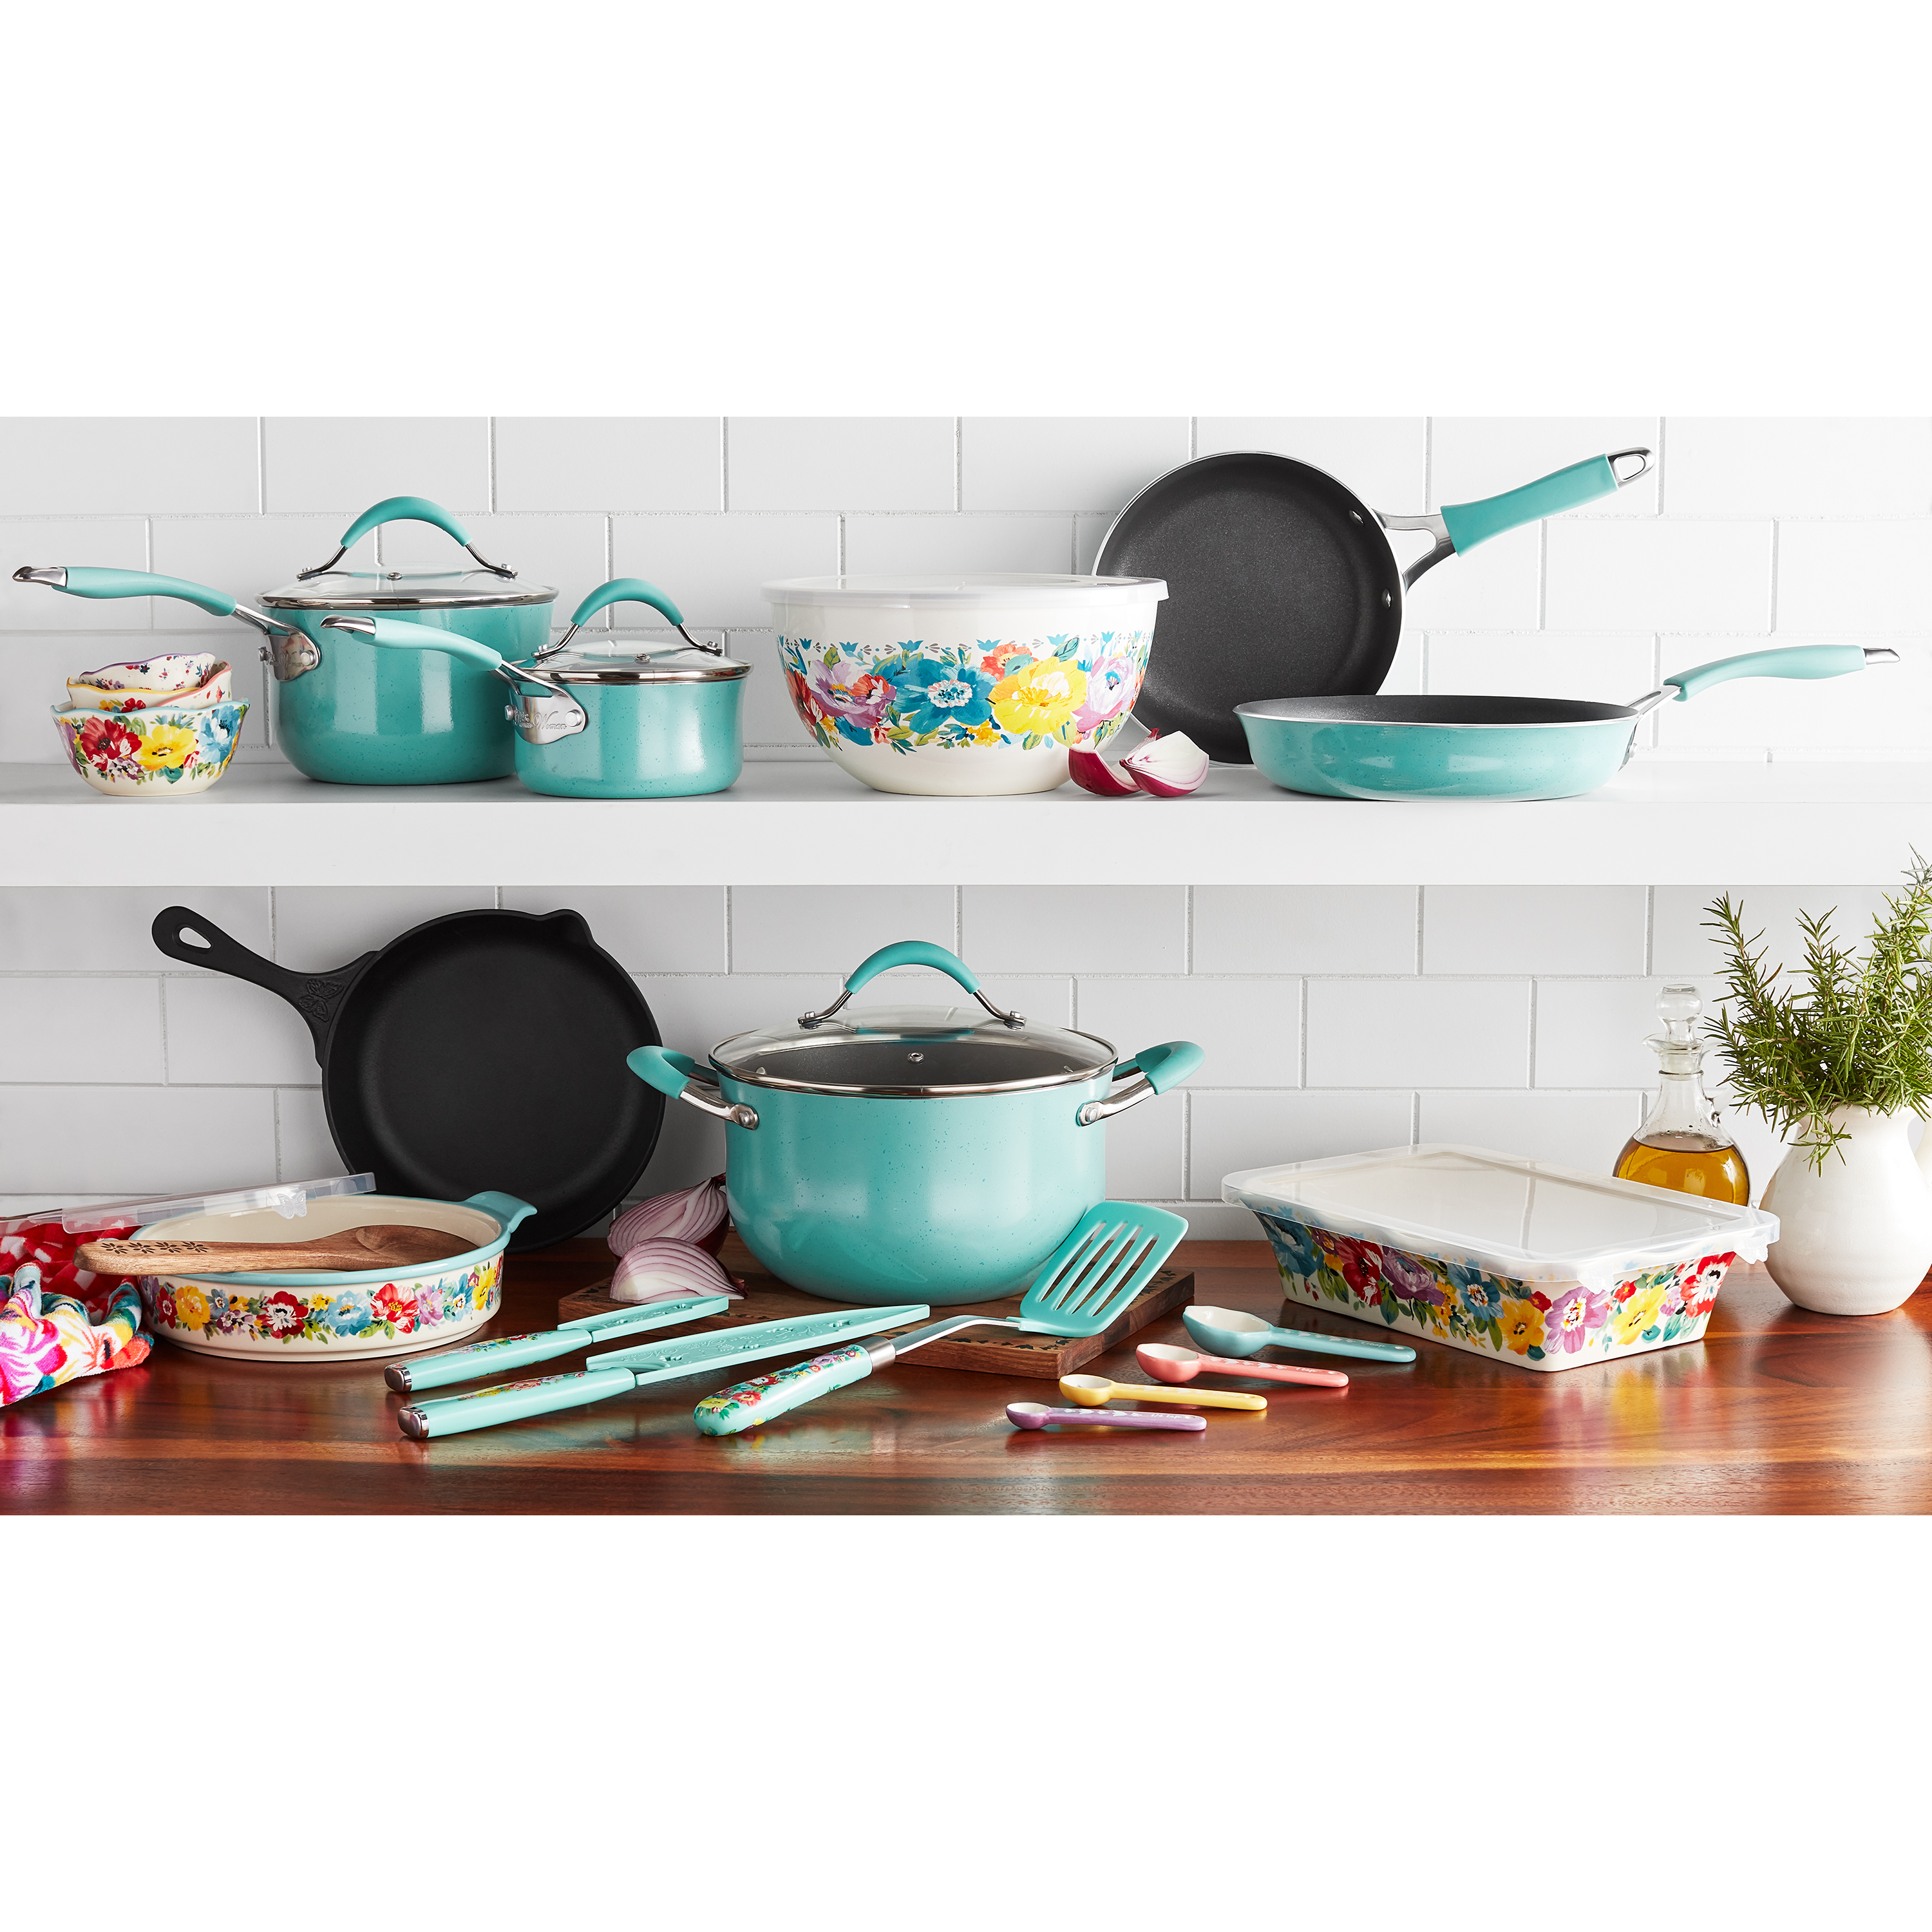 The Pioneer Woman Sweet Romance 30-Piece Nonstick Cookware Set, Turquoise - image 11 of 13